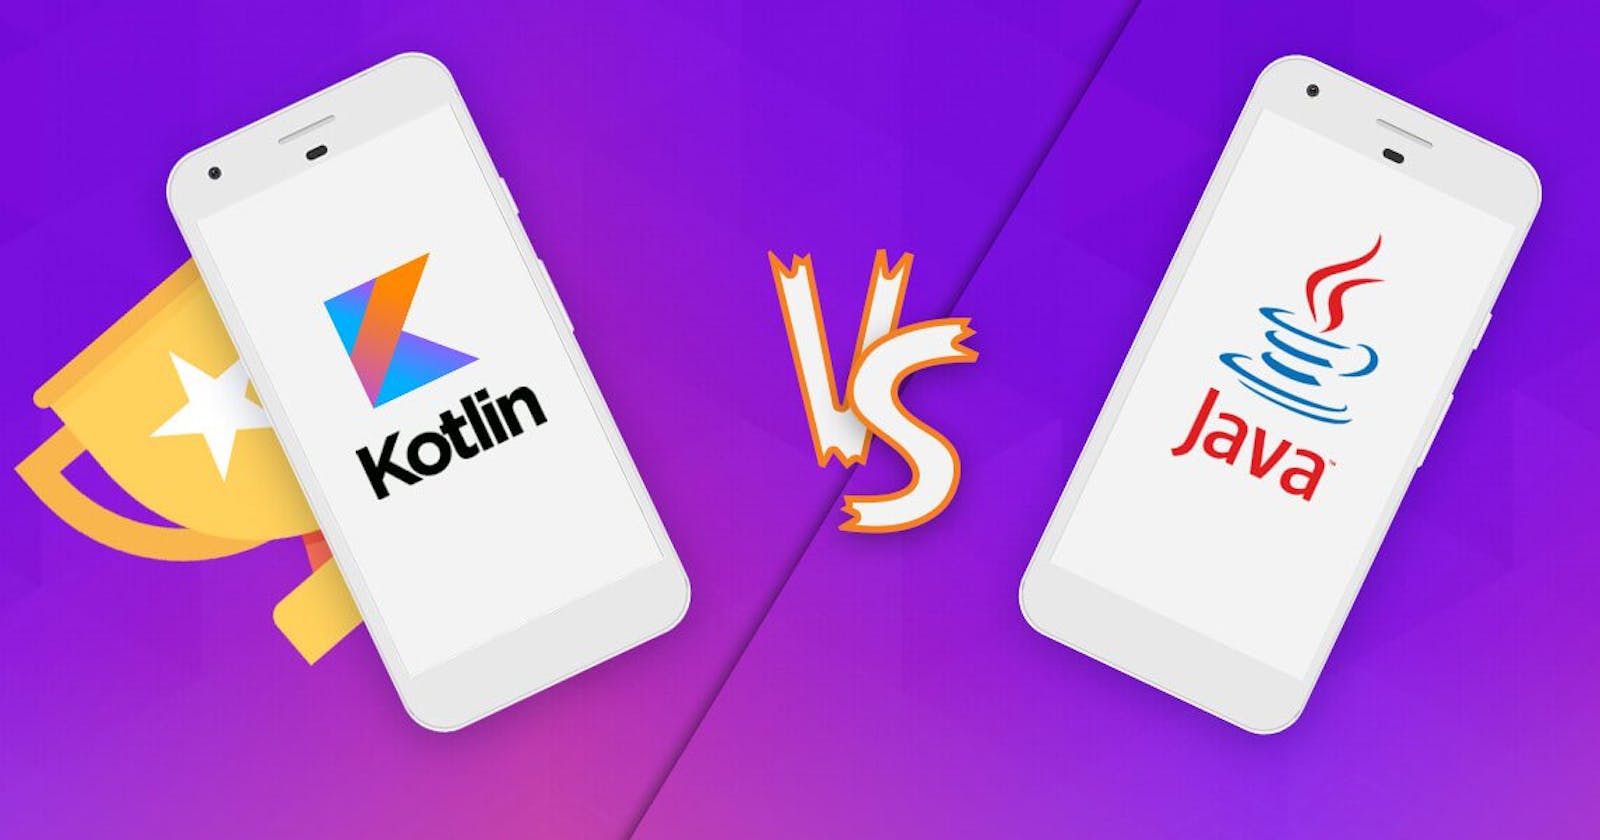 Which One Should You Opt for Android App Development? Kotlin or Java